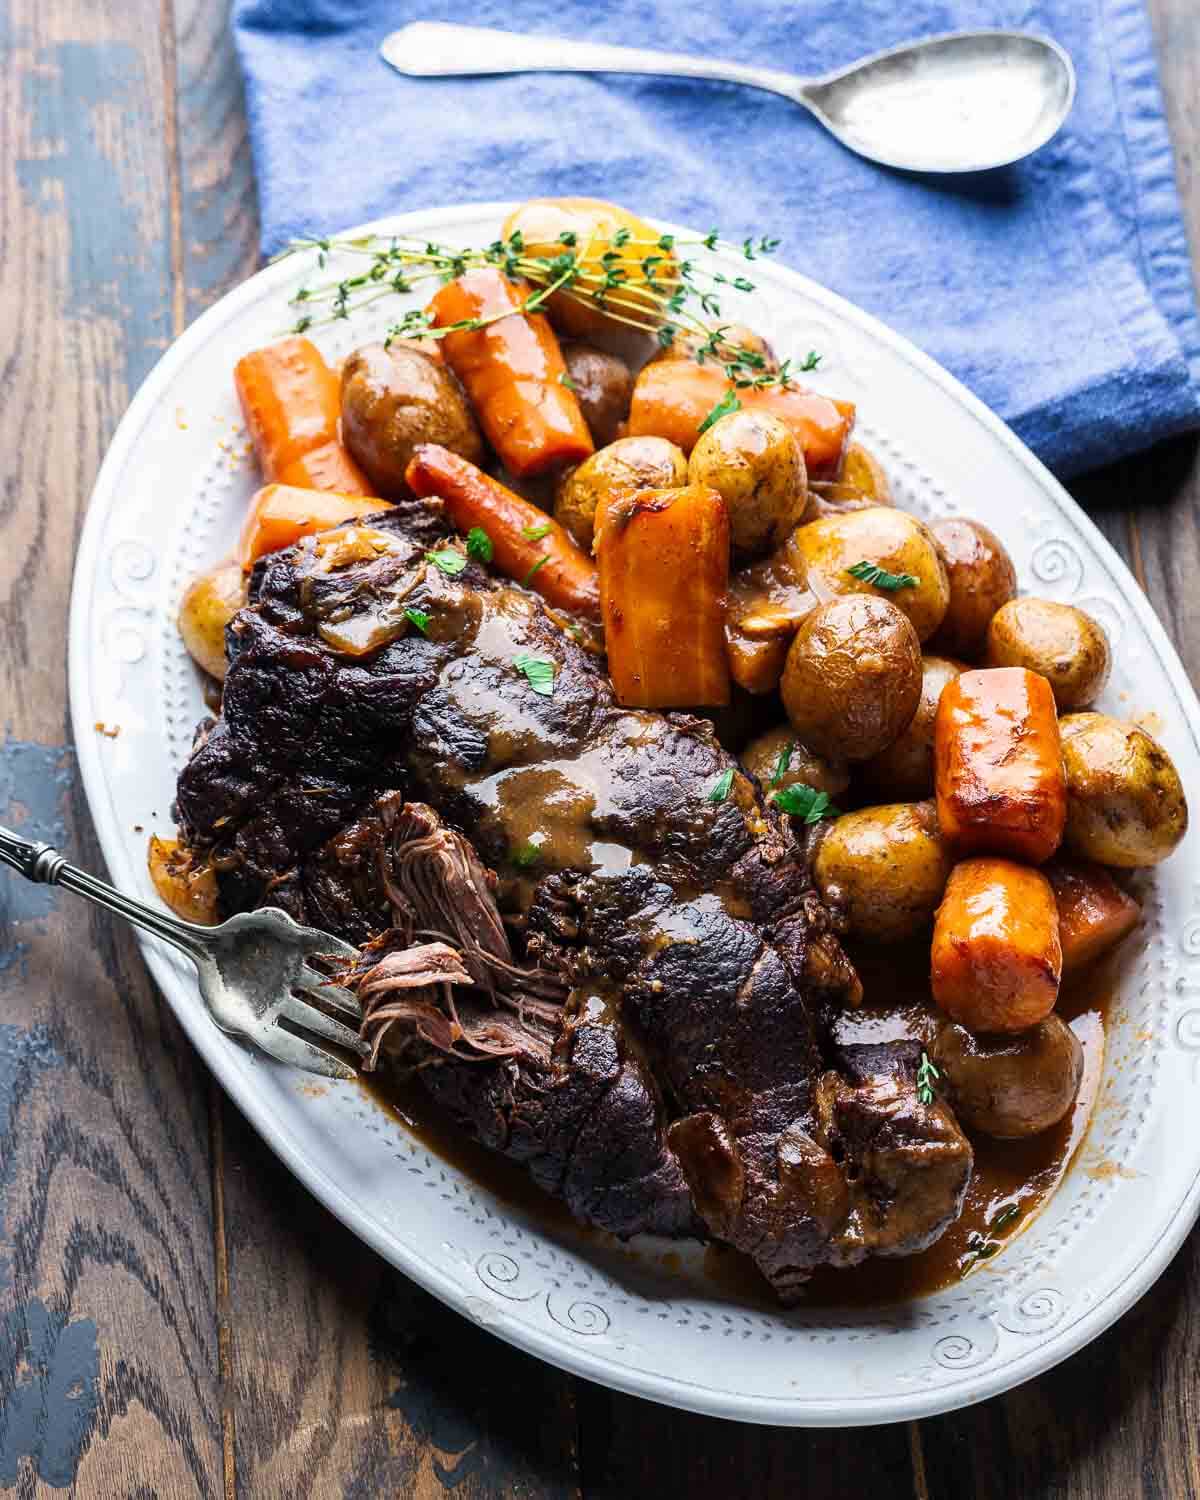 Large white platter with pot roast, carrots, potatoes, and blue napkin and serving spoon on the side.